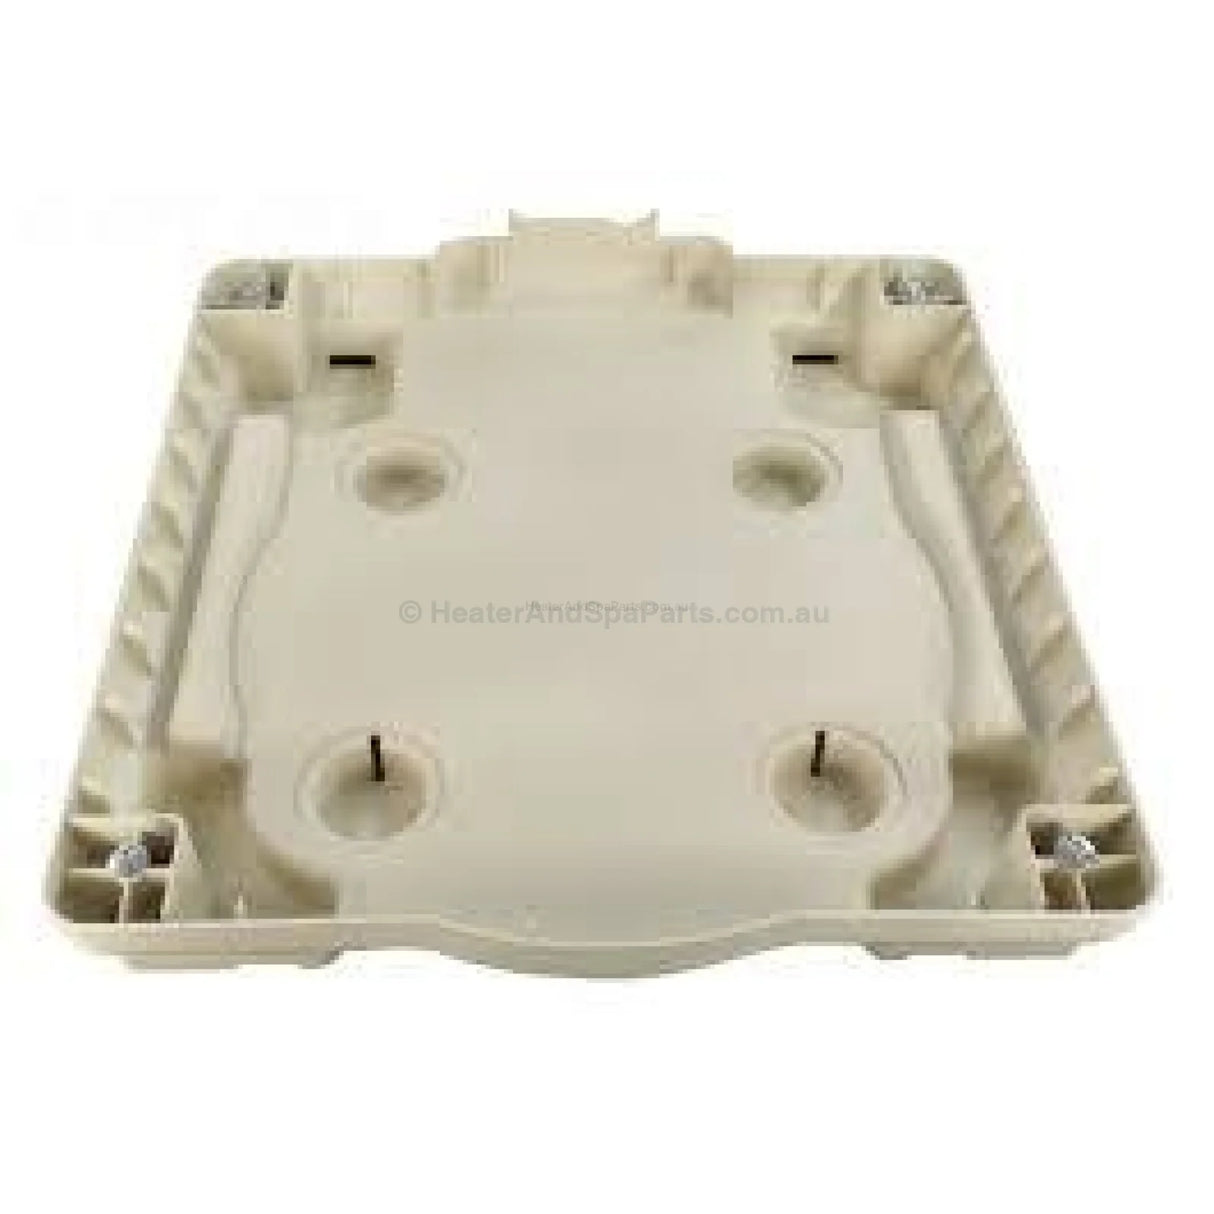 Pentair Mastertemp Combustion Chamber Base - Heater and Spa Parts